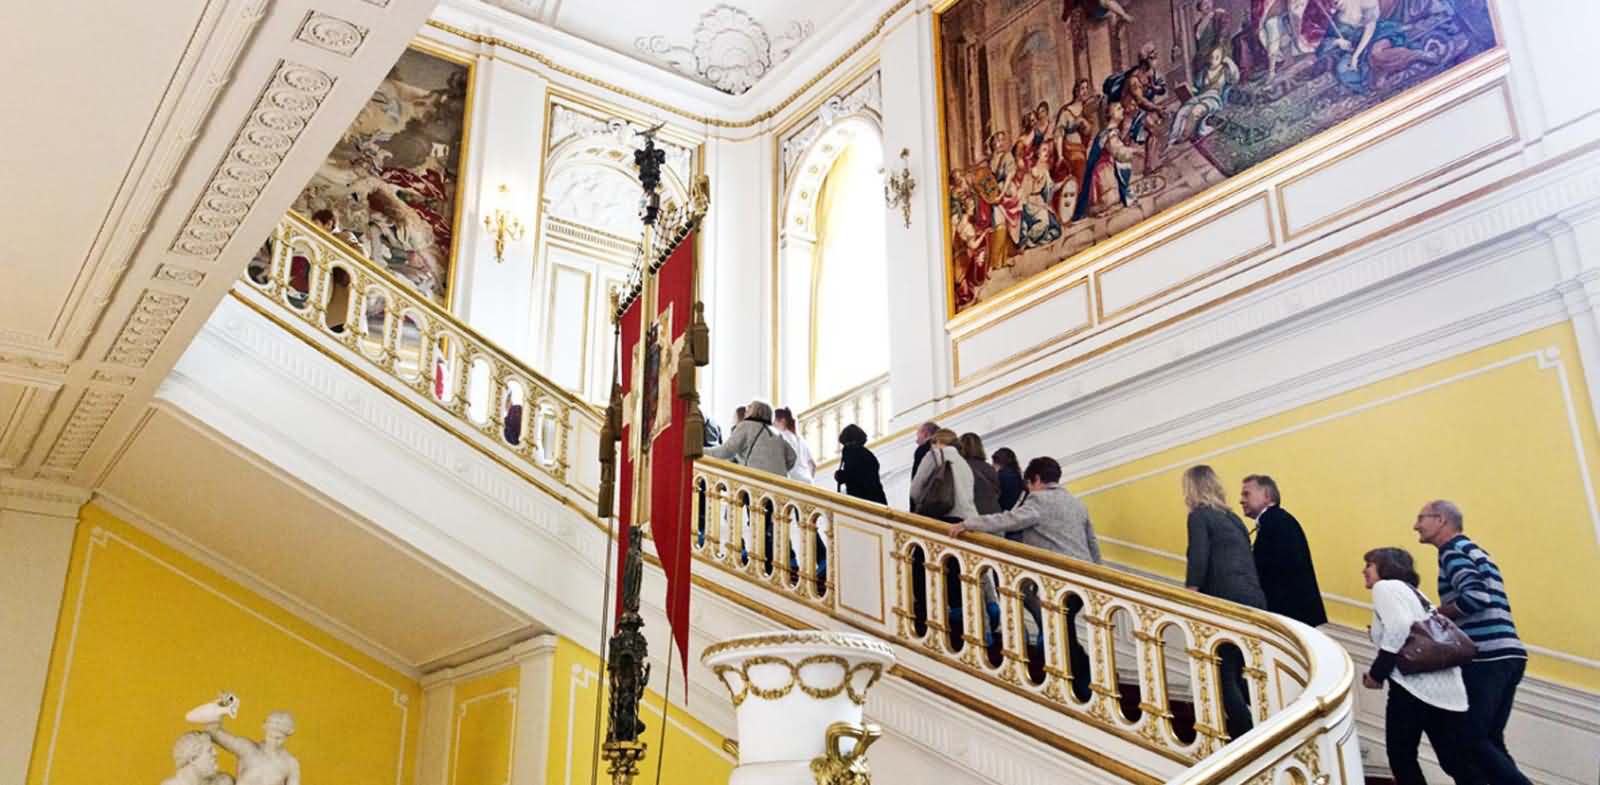 Interior Of The Christiansborg Palace In Denmark